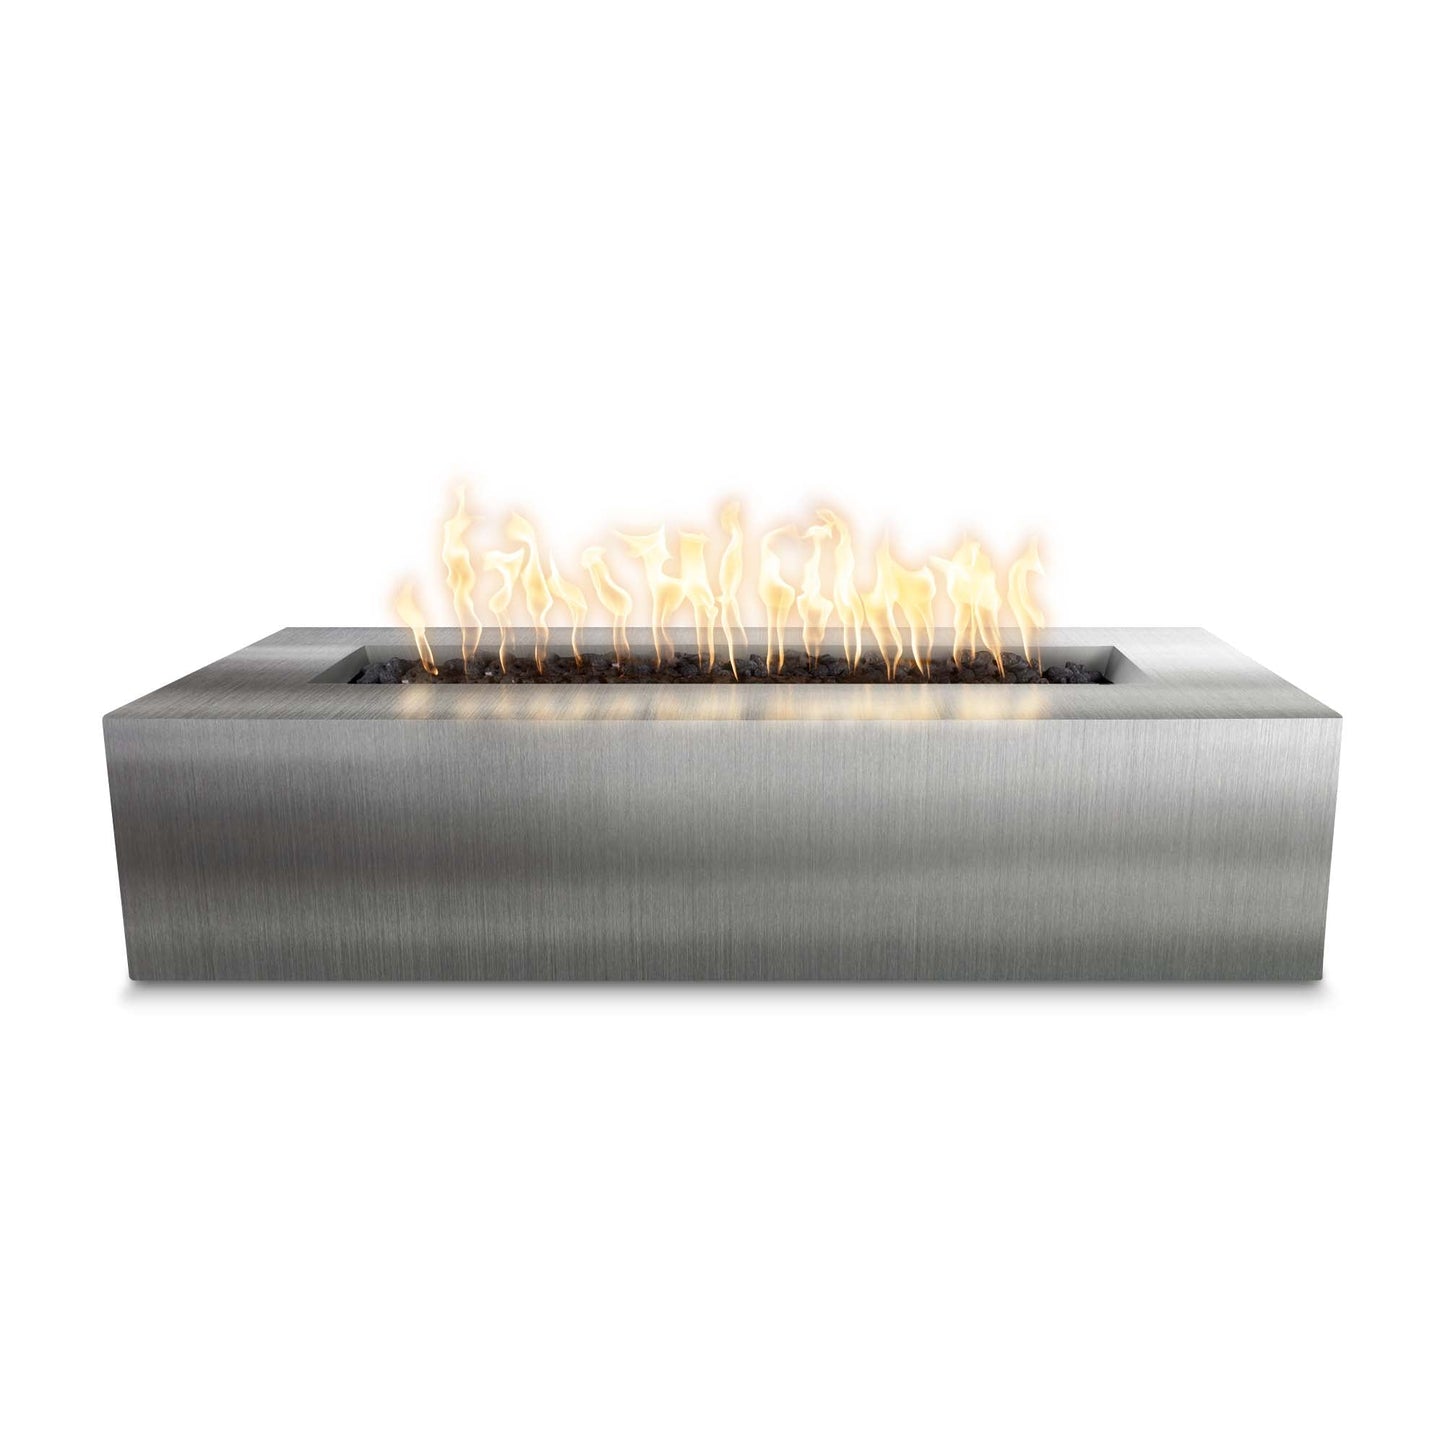 The Outdoor Plus Rectangular Regal 54" Corten Steel Liquid Propane Fire Pit with 12V Electronic Ignition